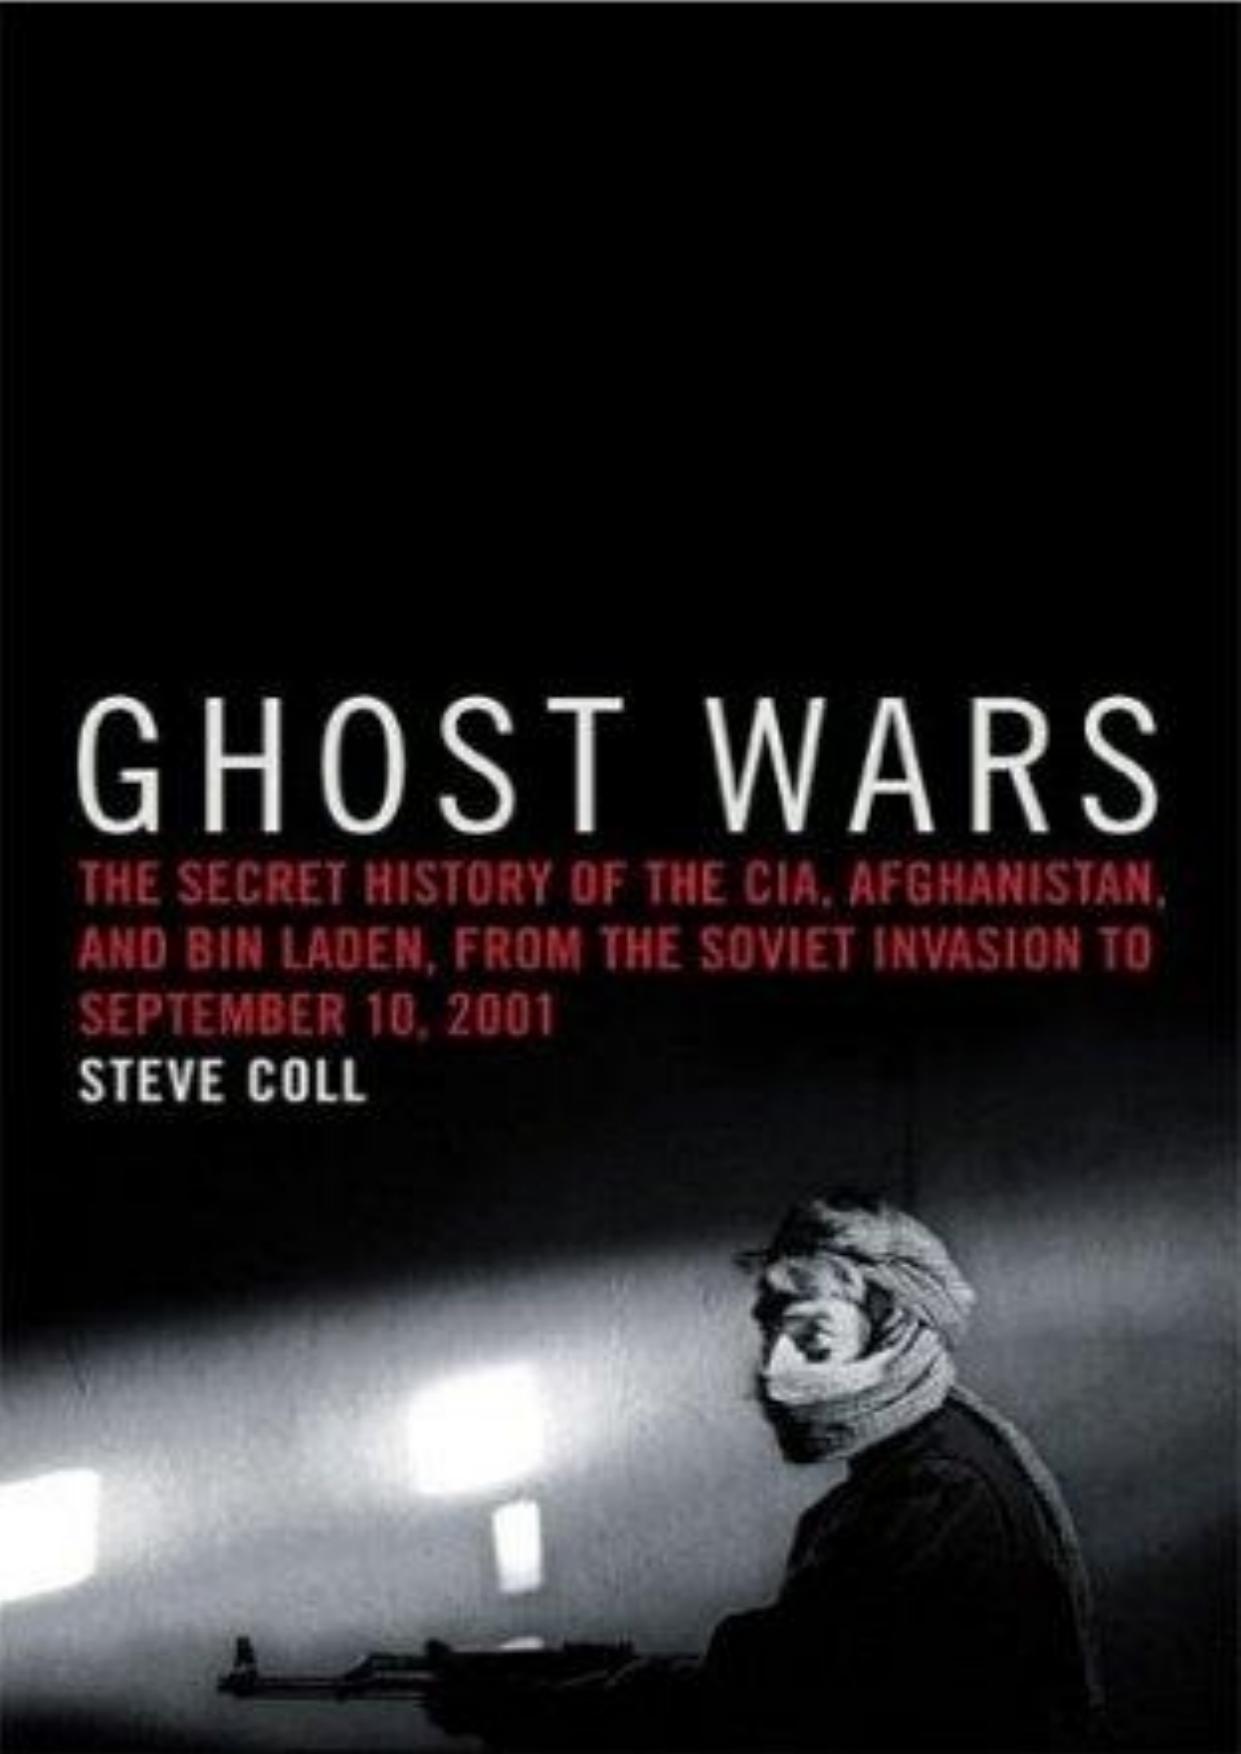 Ghost Wars: The Secret History of the CIA, Afghanistan, and Bin Laden, from the Soviet Invasion to September 10, 2011